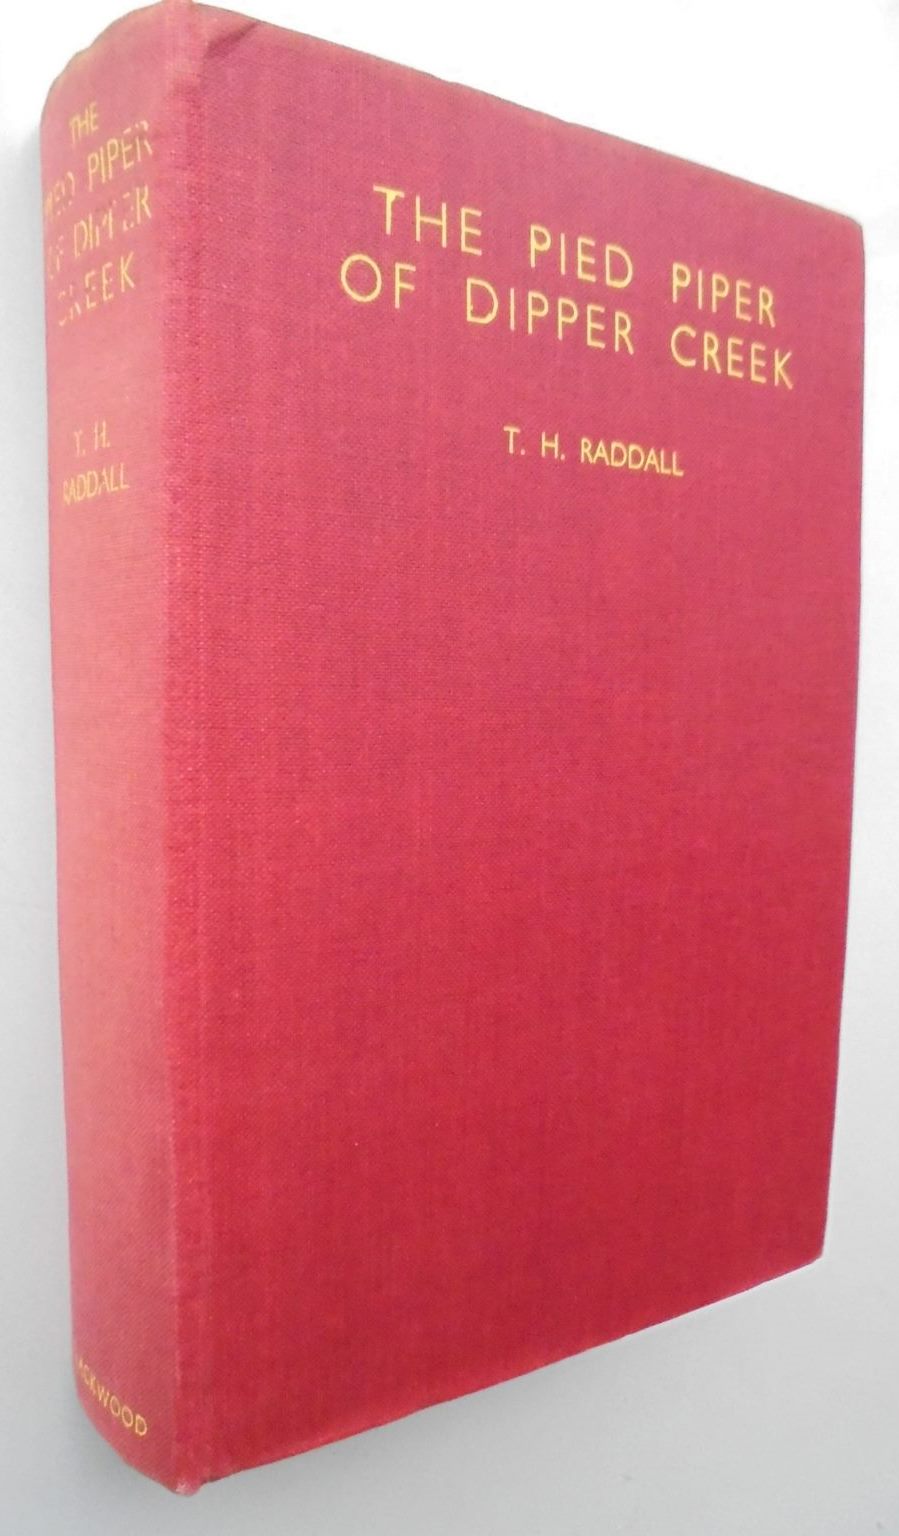 The Pied Piper of Dipper Creek and Other Stories. First edition hardback, 1939. Scarce collection of short stories about Nova Scotia.